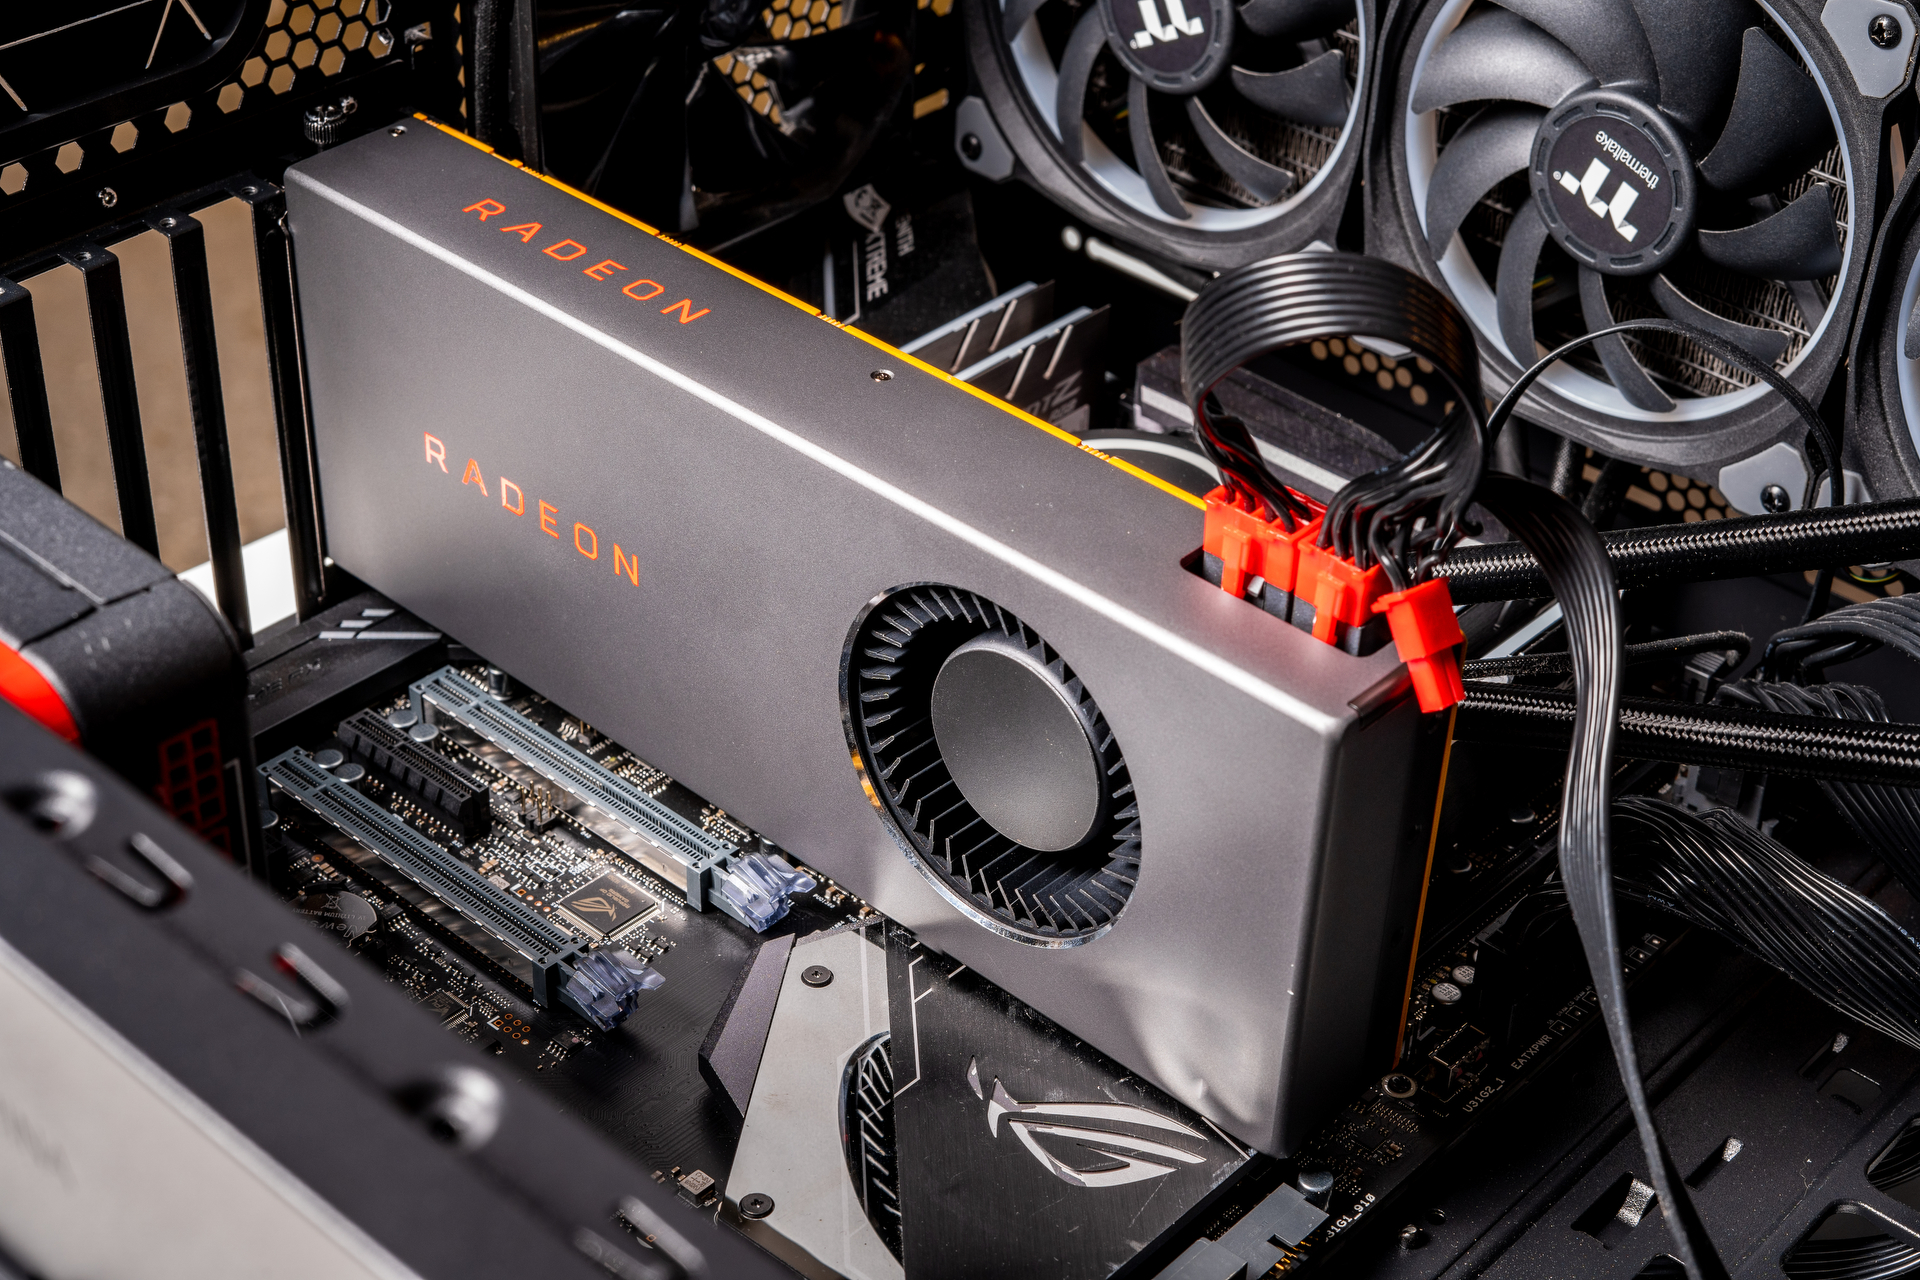 AMD Radeon RX 5700 XT vs. RX 5700: Which Is the Better Value?